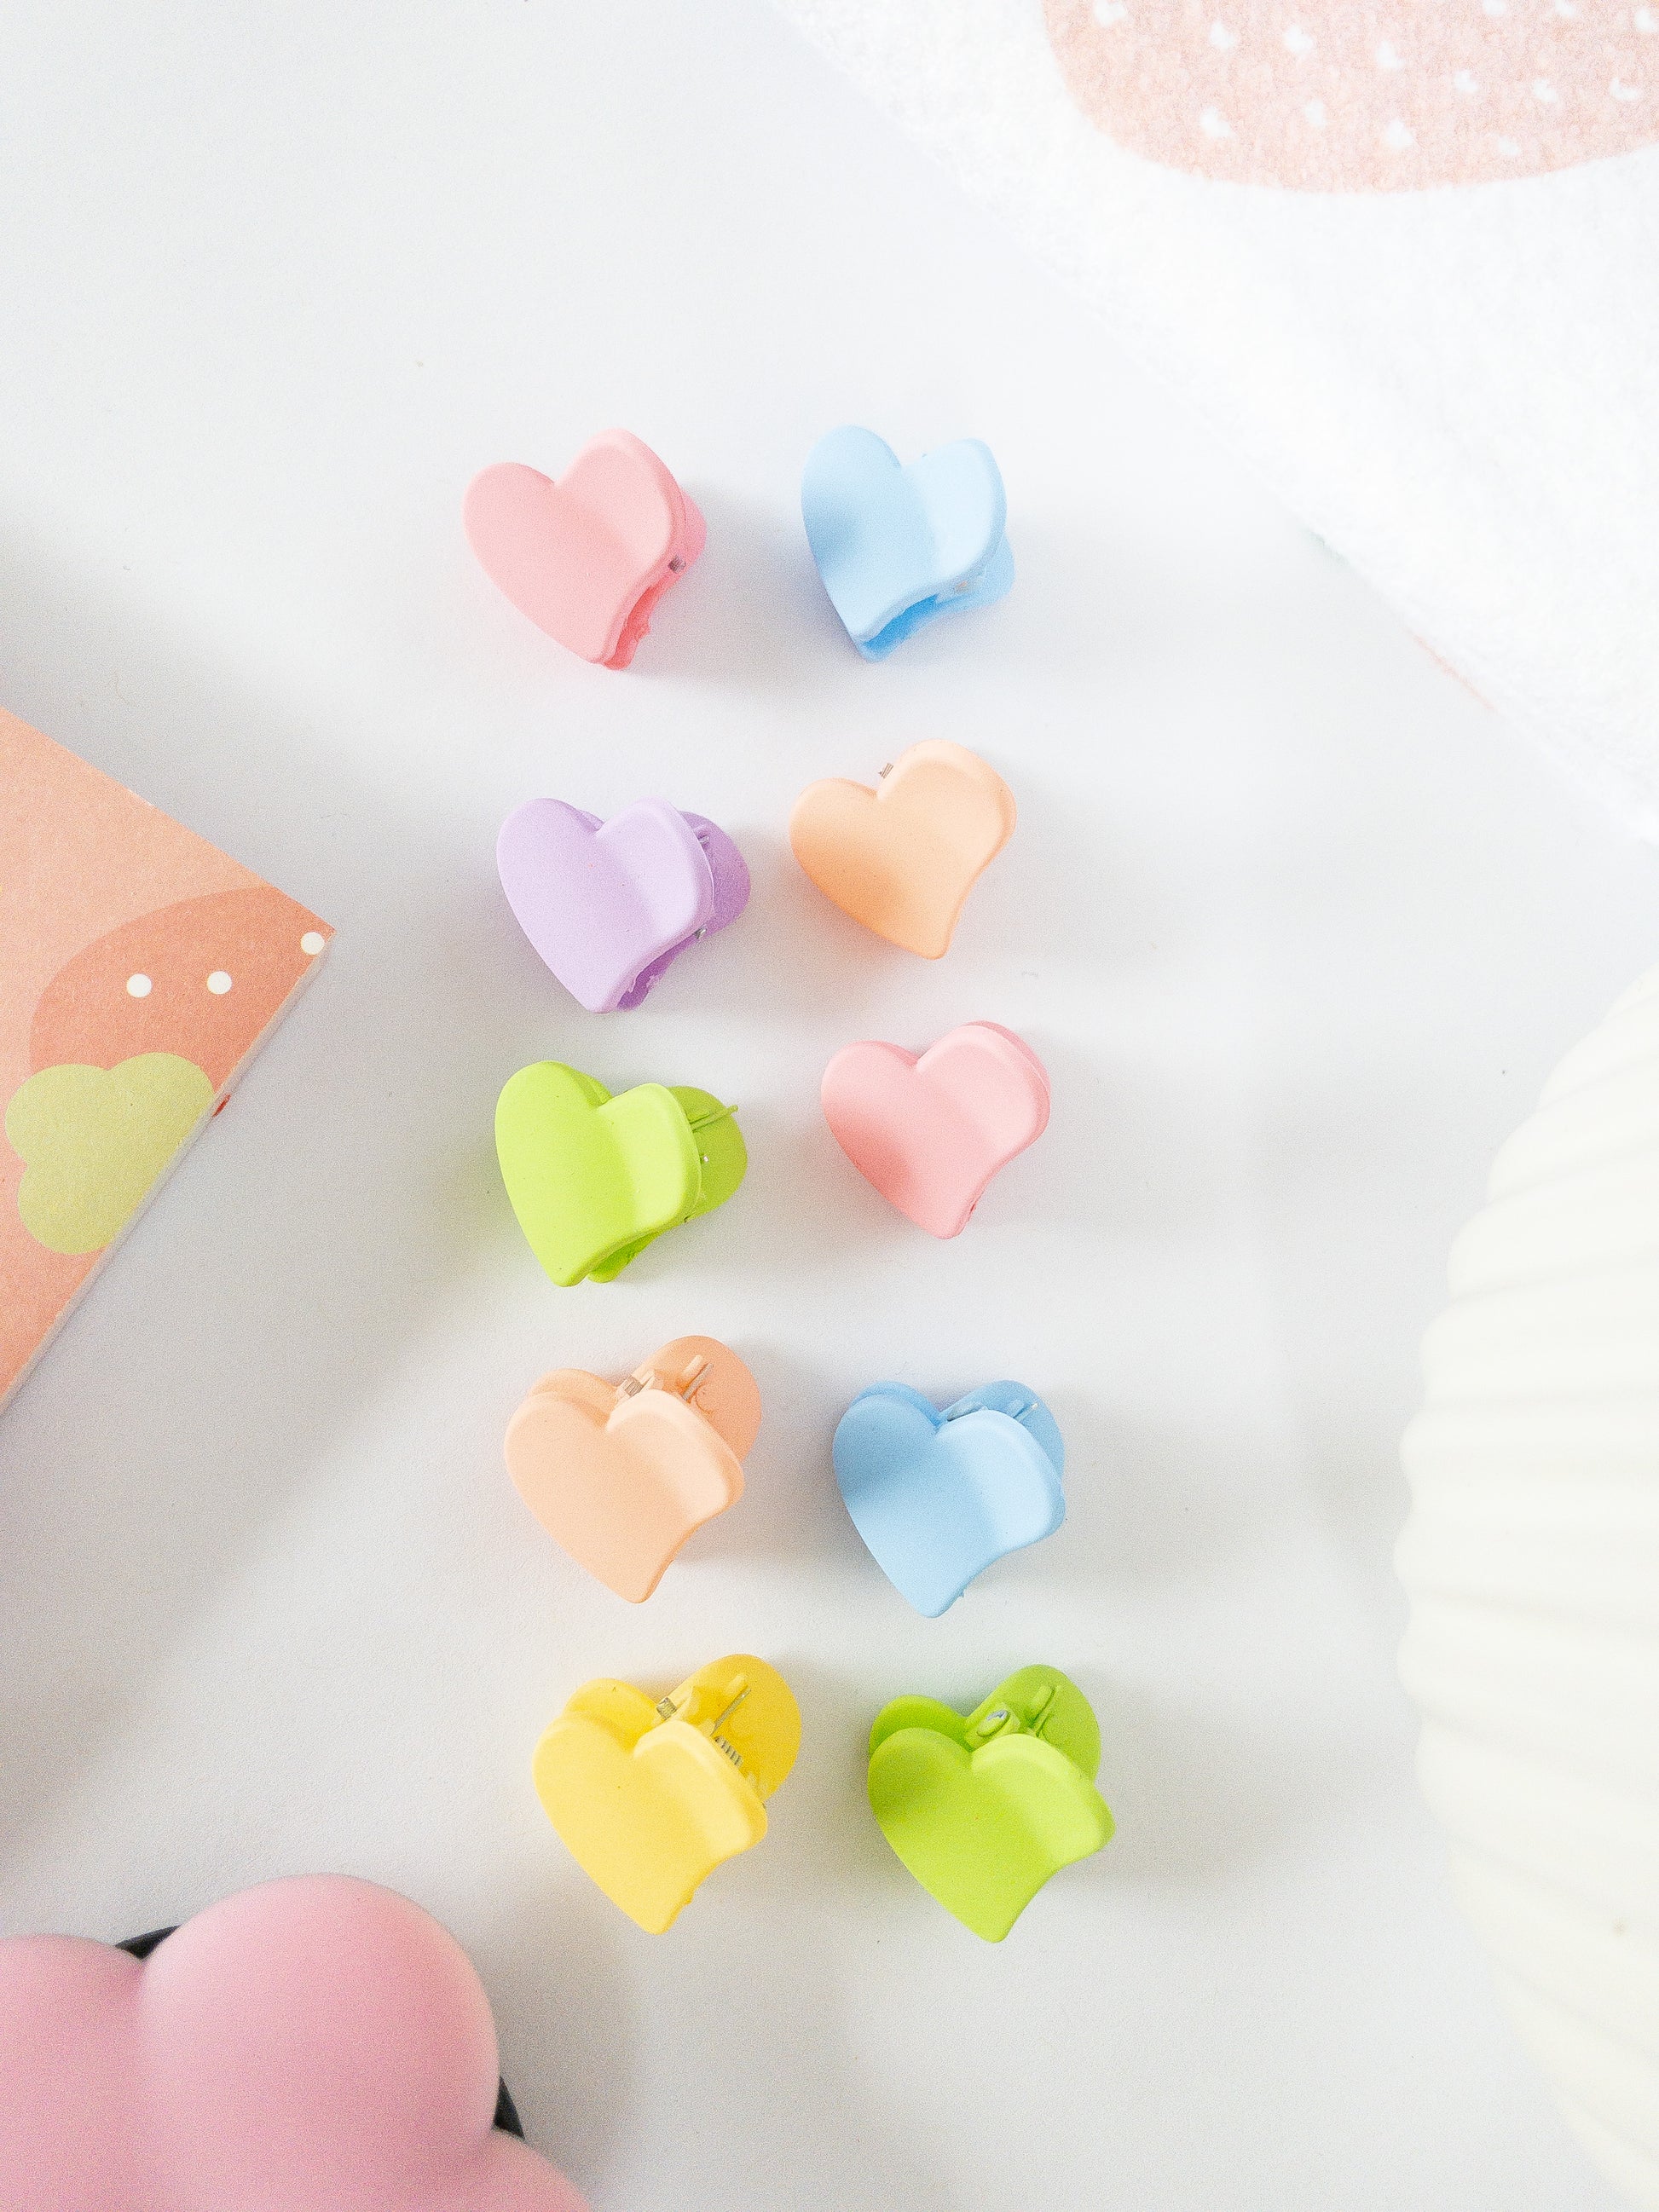 Matte, lovable, and eenie mini. This pack of 10 mini hearts come in an a mix of colors and are the cutest little hair claw clips to give your hairstyle that playful look.